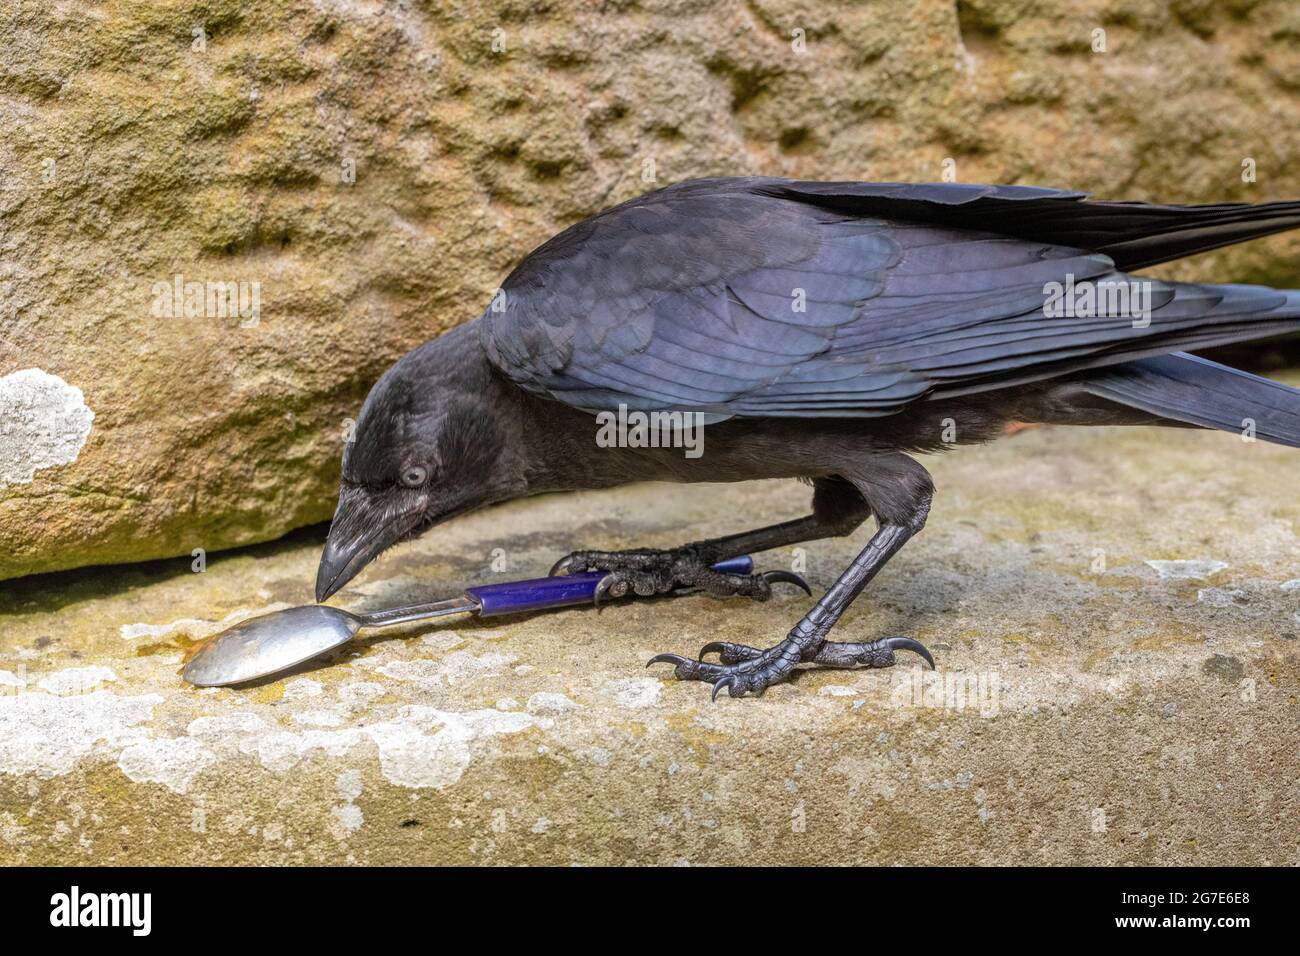 Jackdaws (Corvus monedula). By repuation, any object of a shiny, reflective kind may be of interest to members of the crow family, Here a juvenile bir Stock Photo